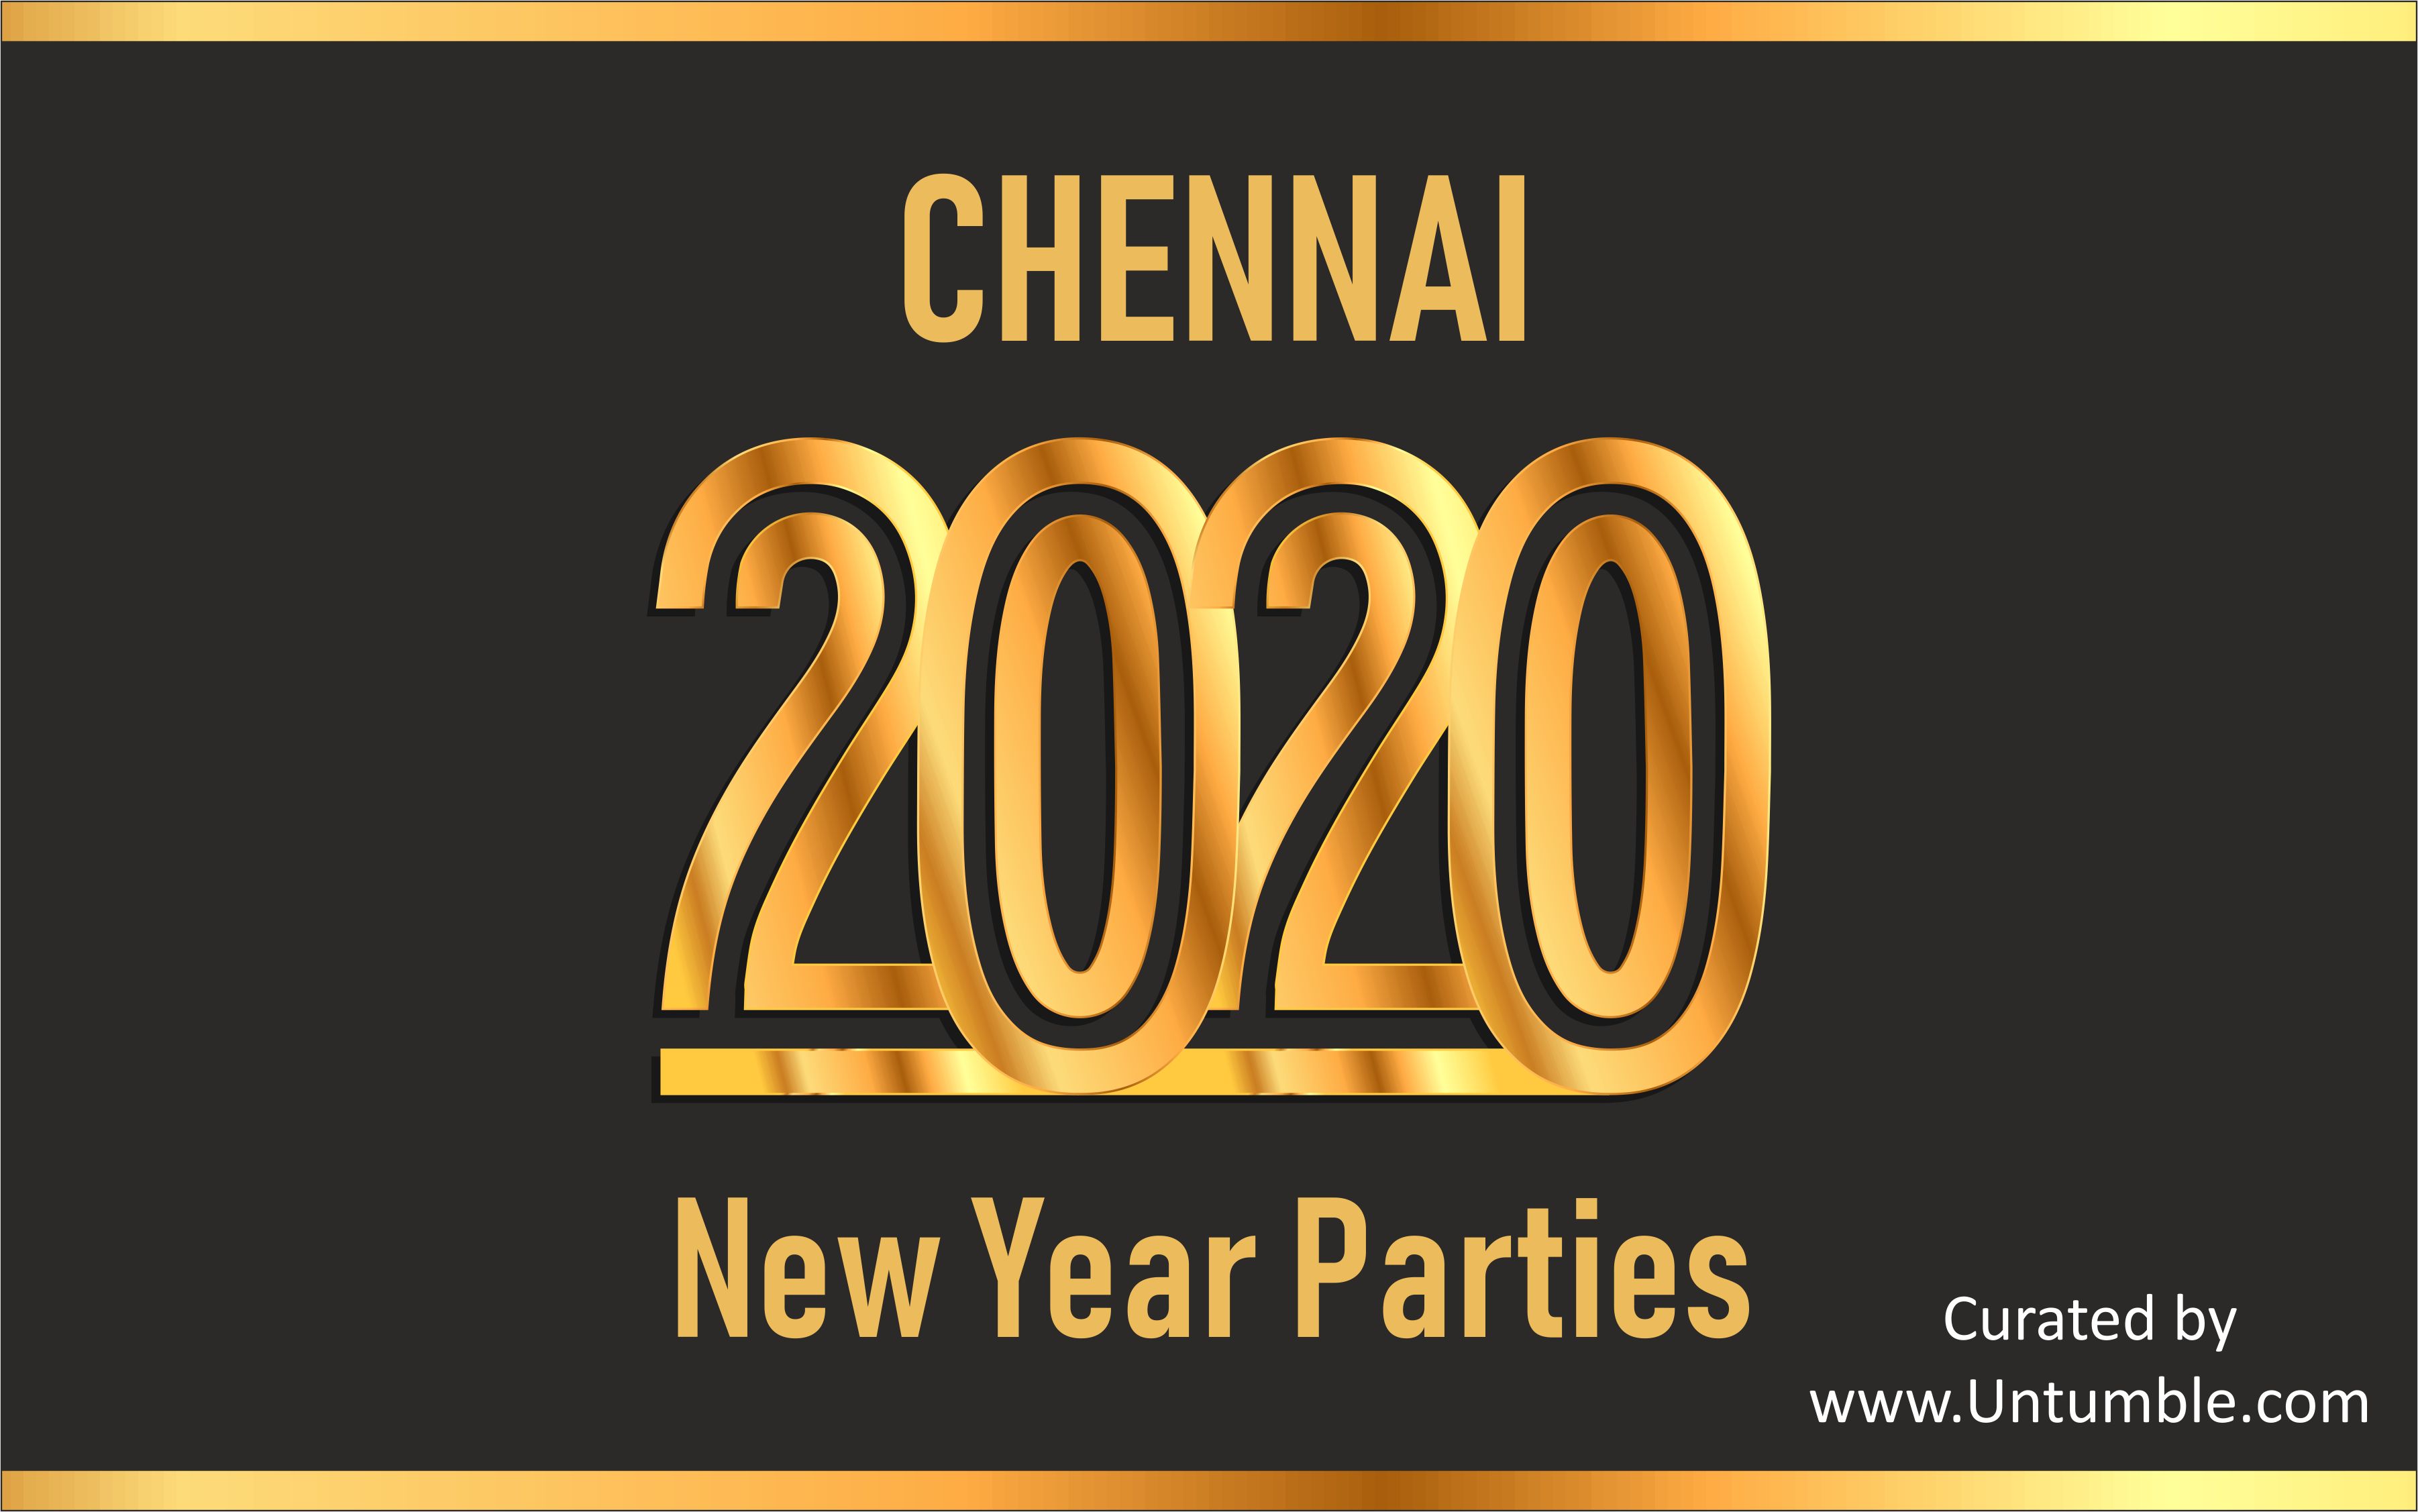 List of New Year 2020 Parties & Events in Chennai